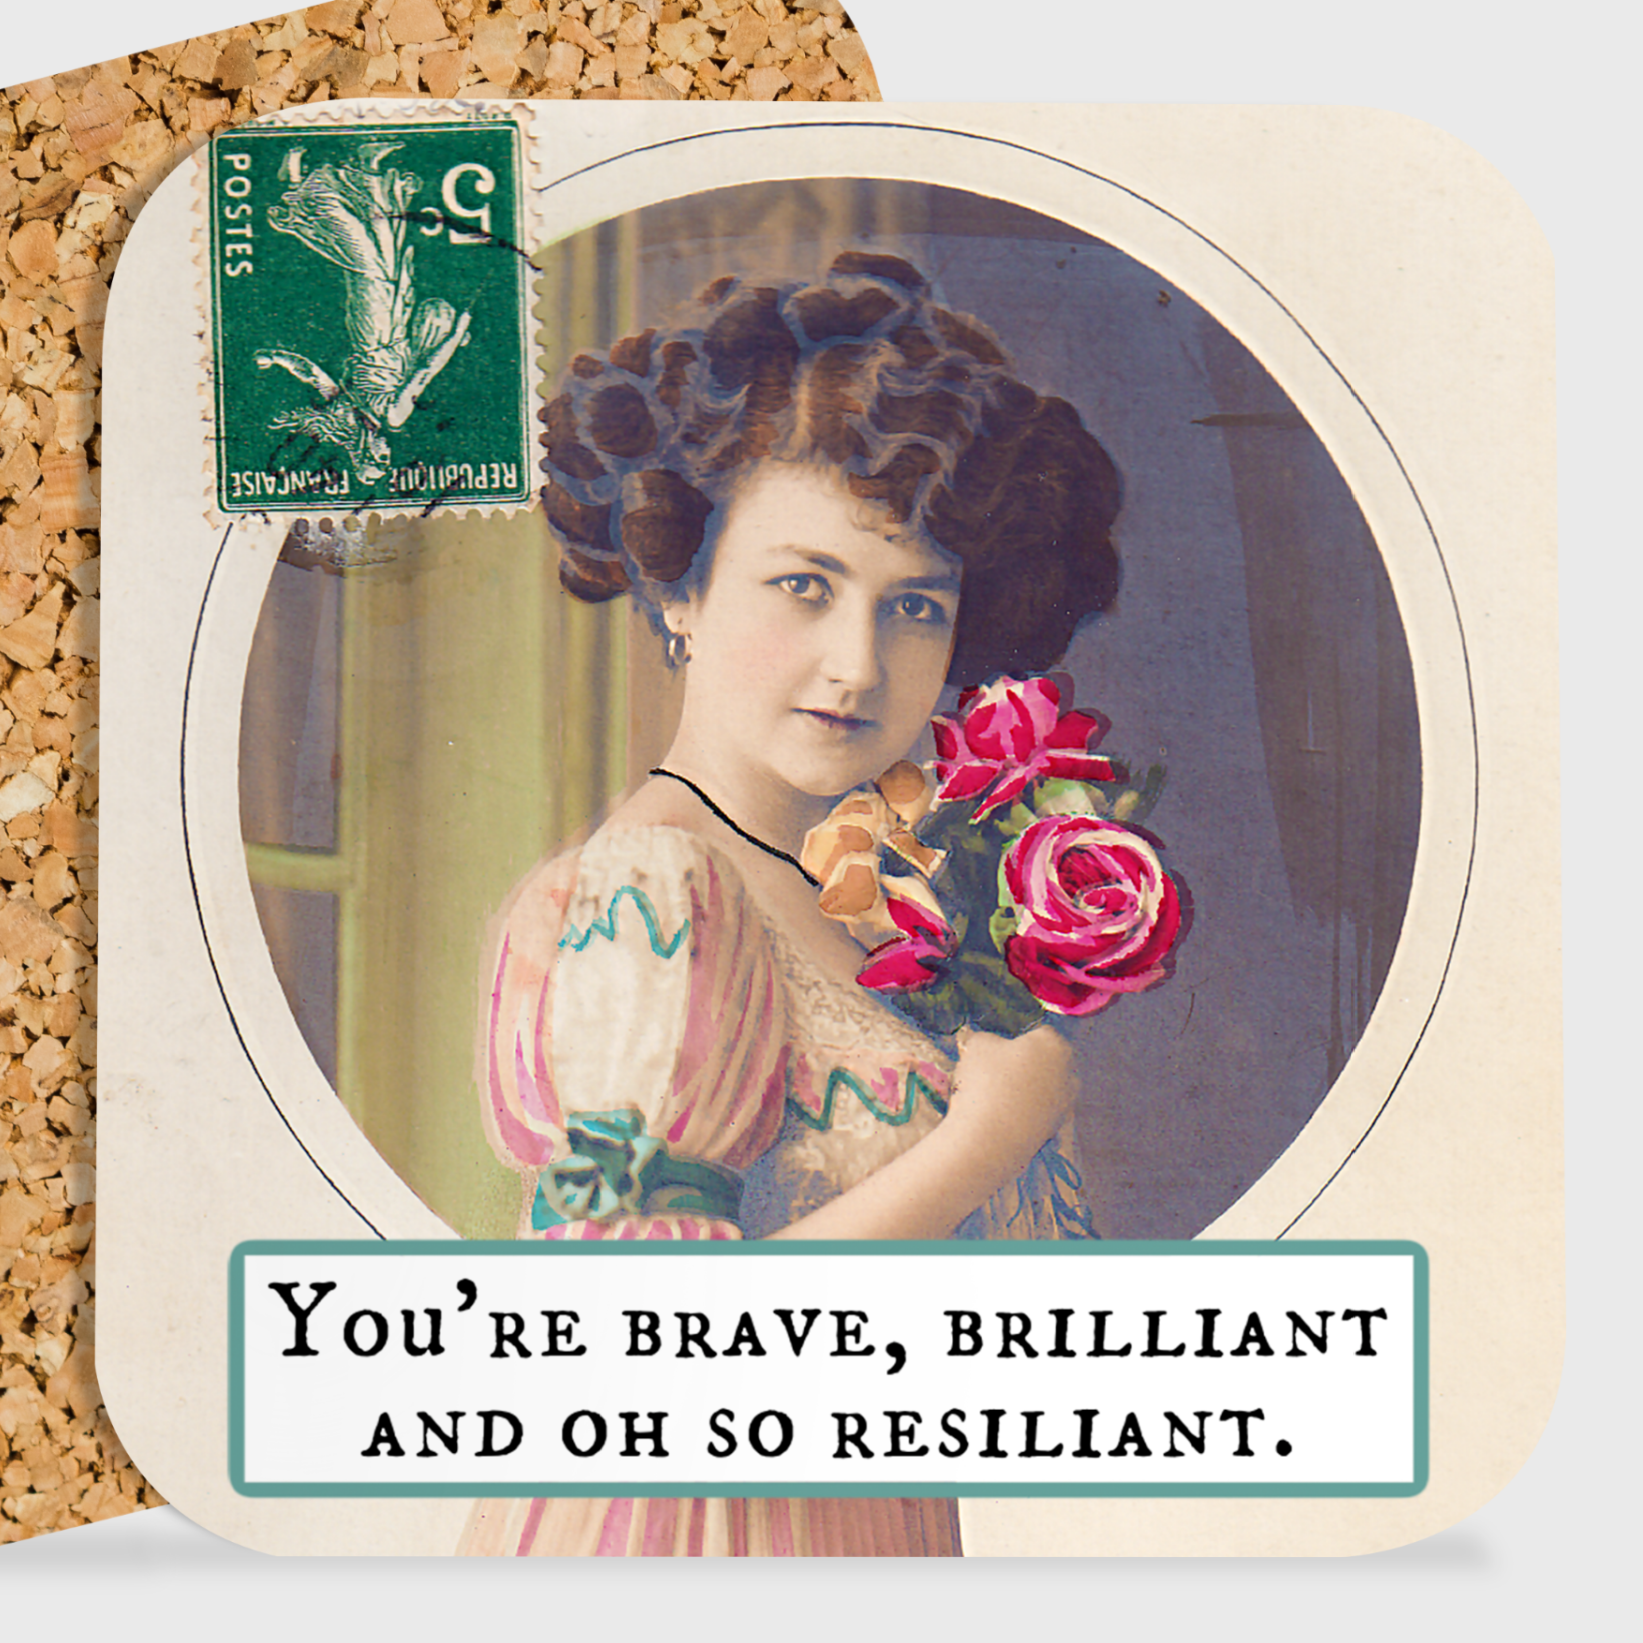 COASTER. You're Brave, Brilliant and Oh So Resilient.